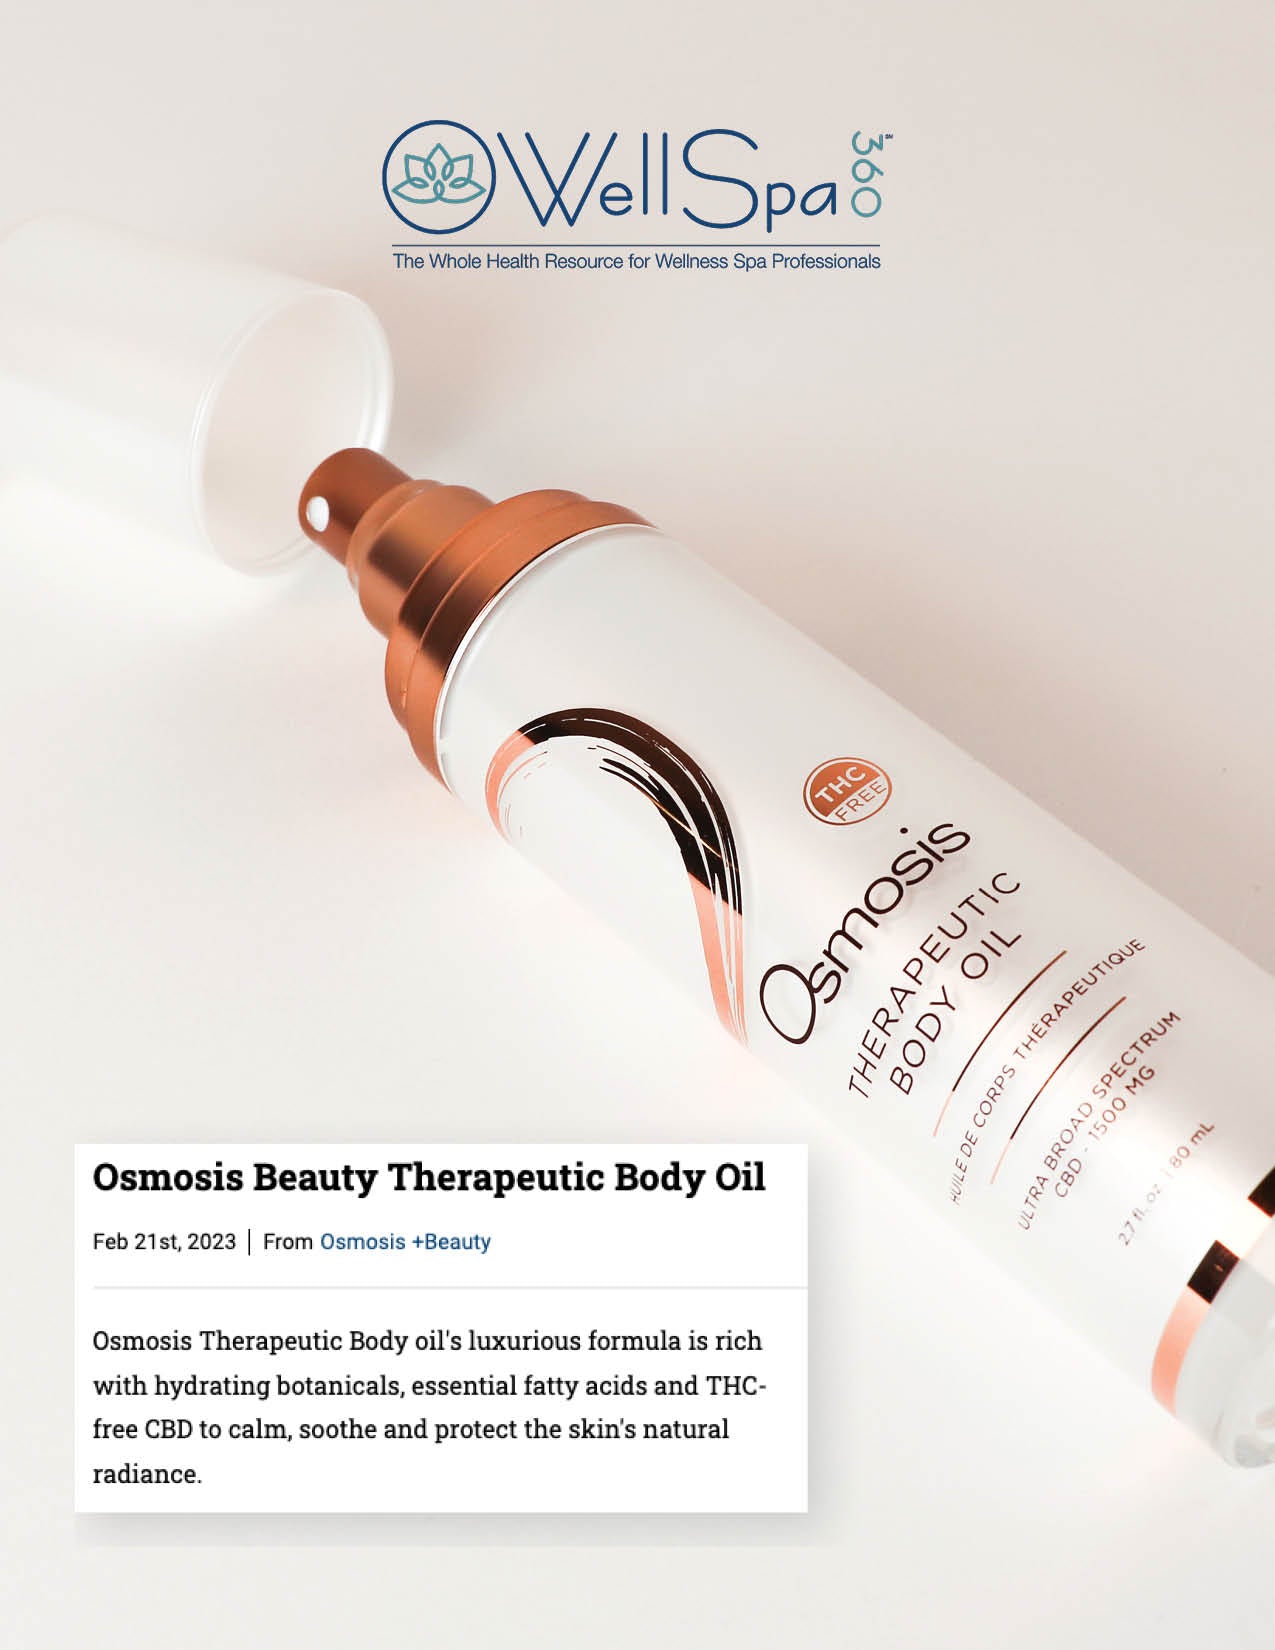 WellSpa 360 featured the Therapeutic Body Oil in their products section.